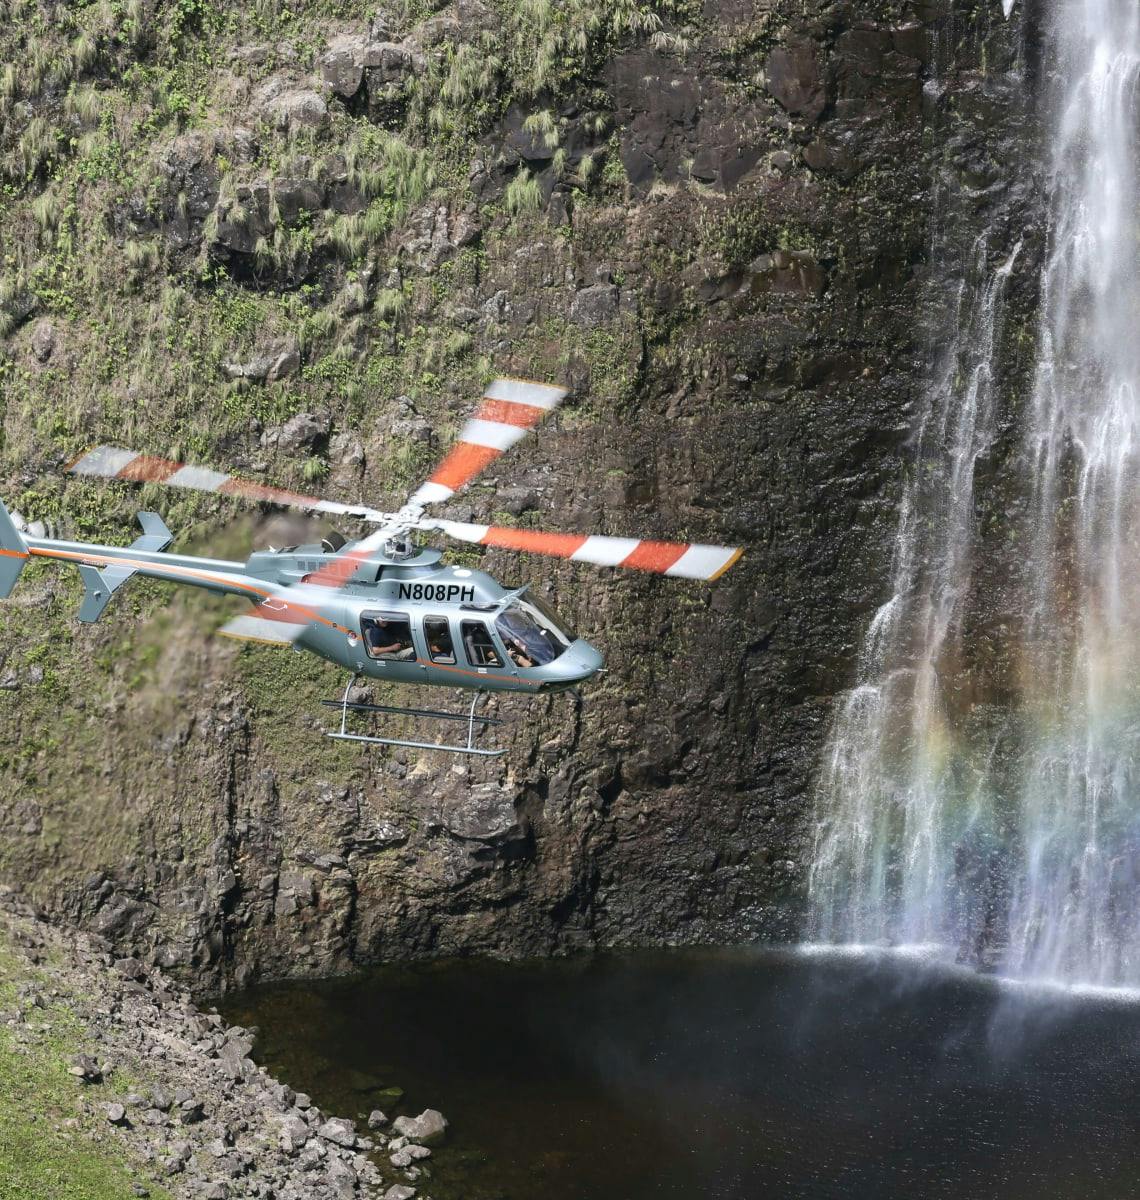 Helicopter flying near a waterfall